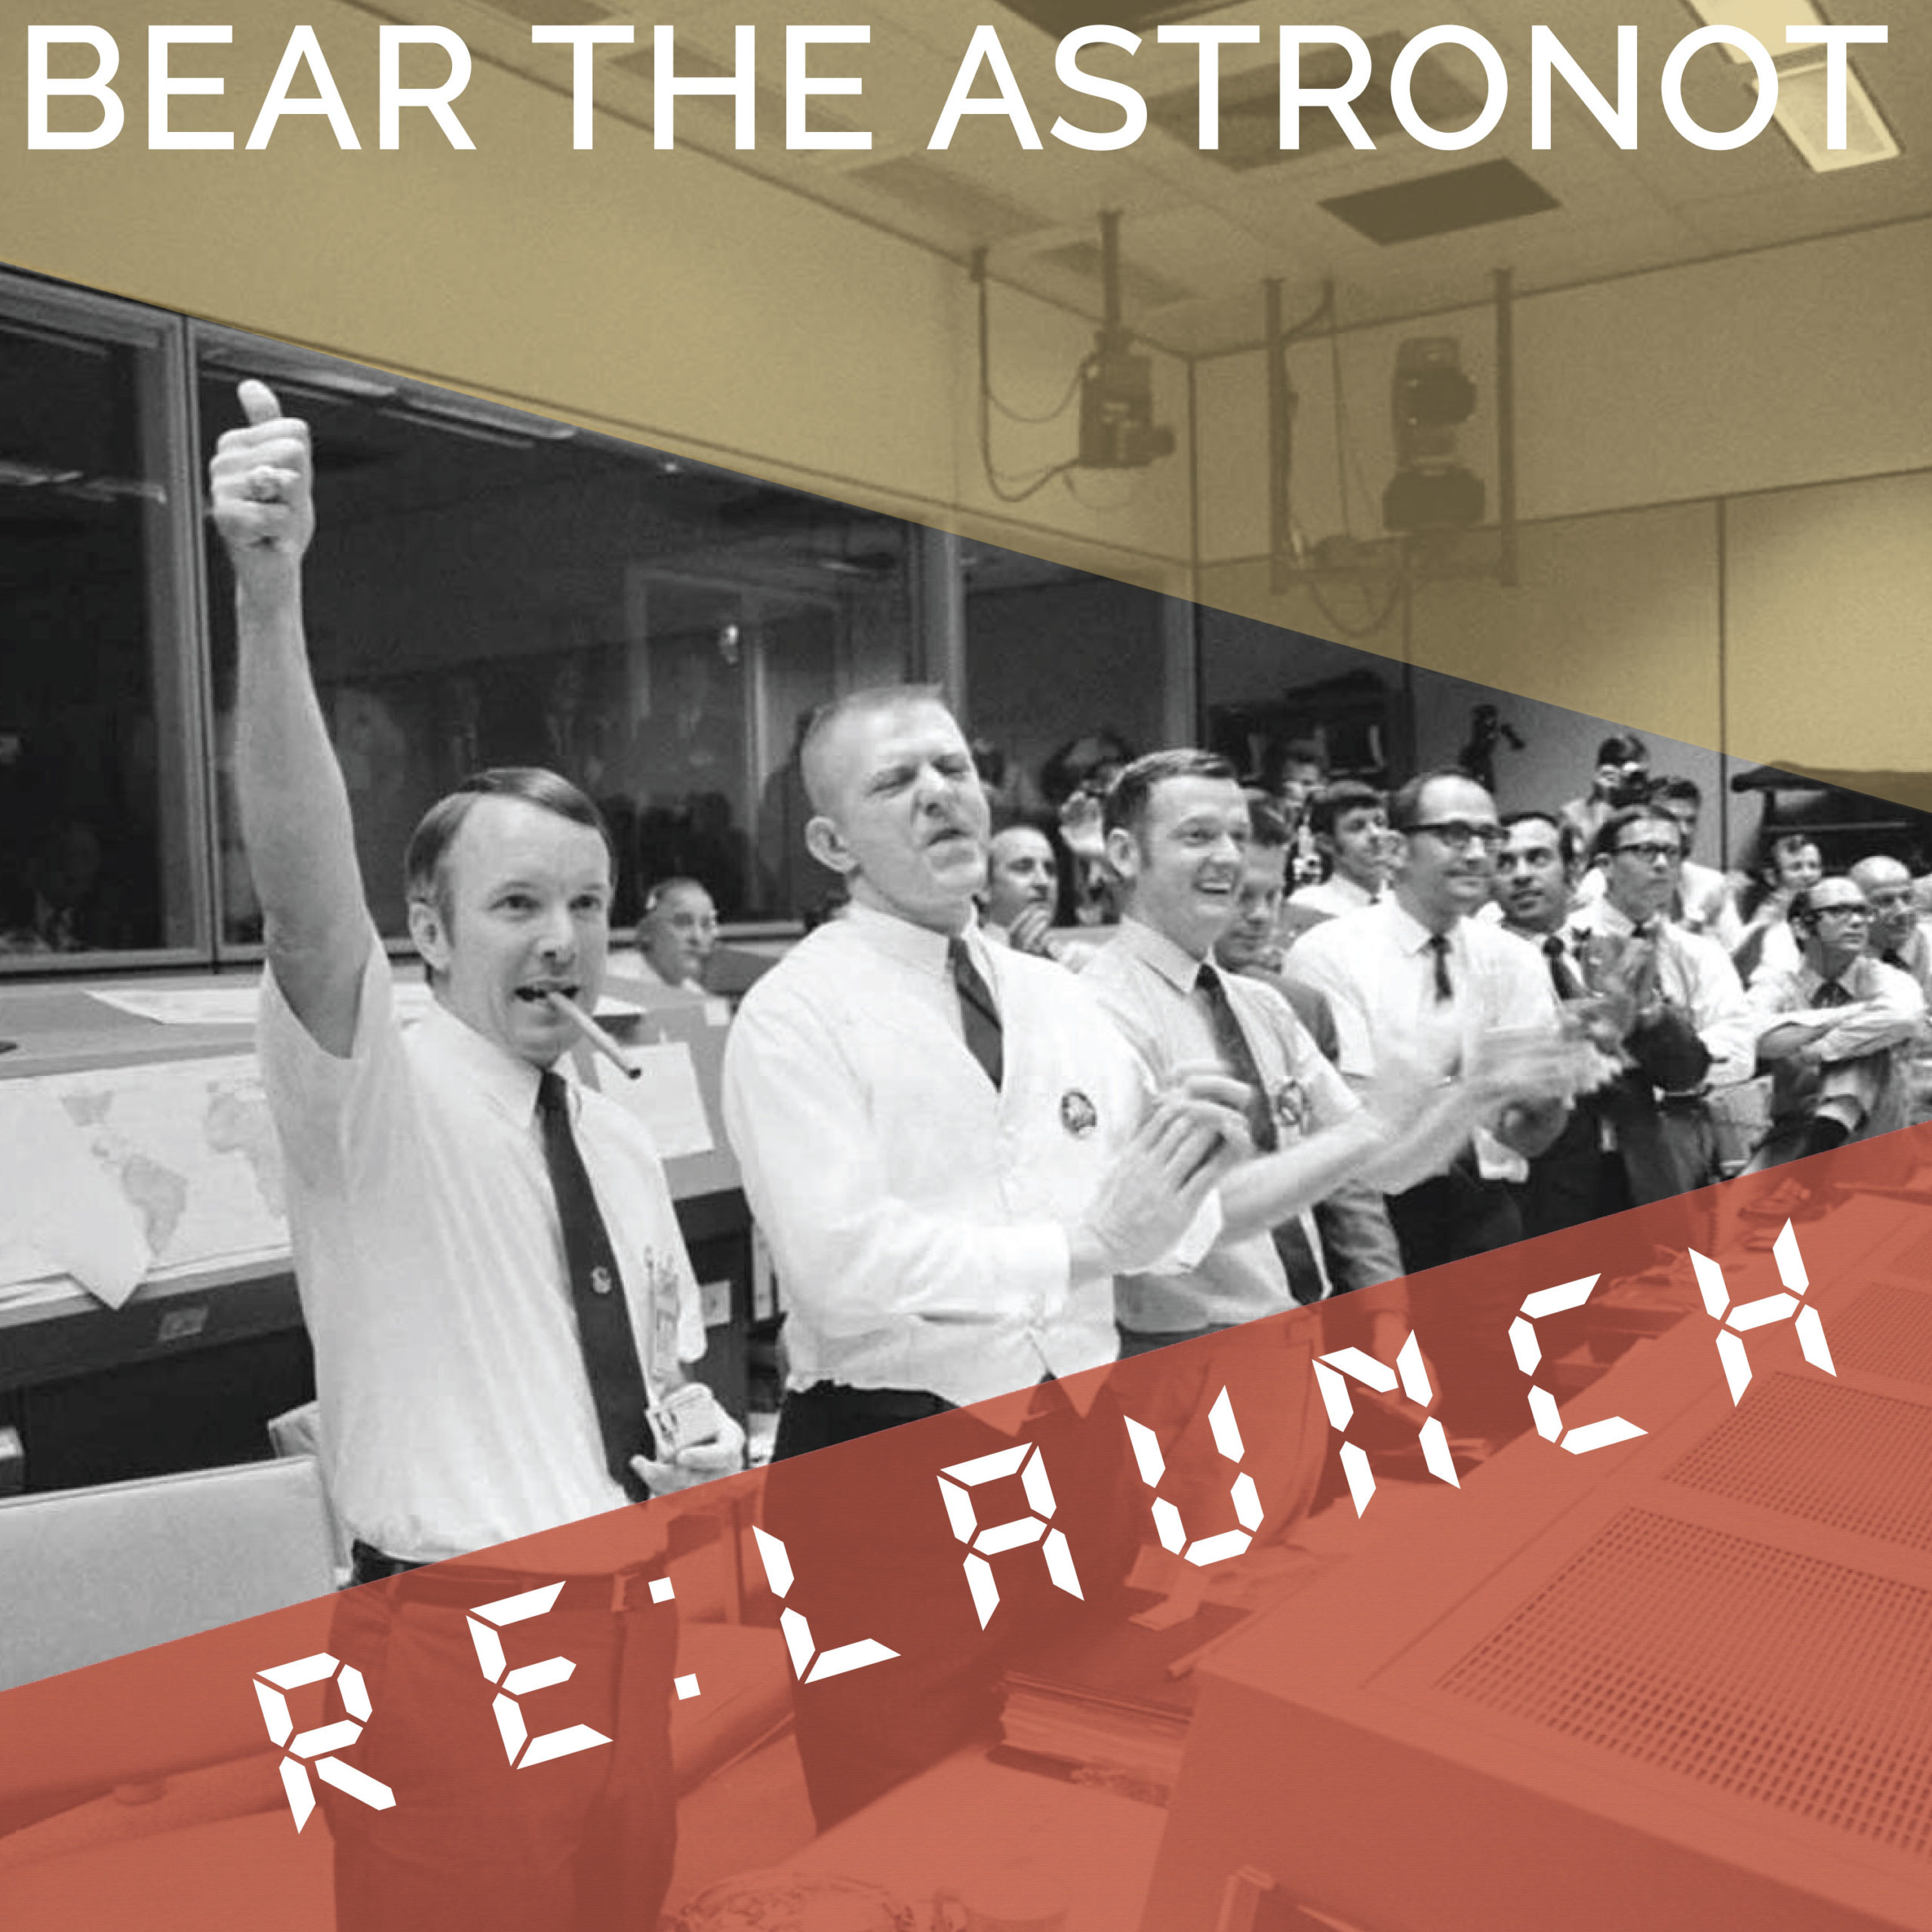 Relaunch-Bear-the-Astronot-Cover-3000